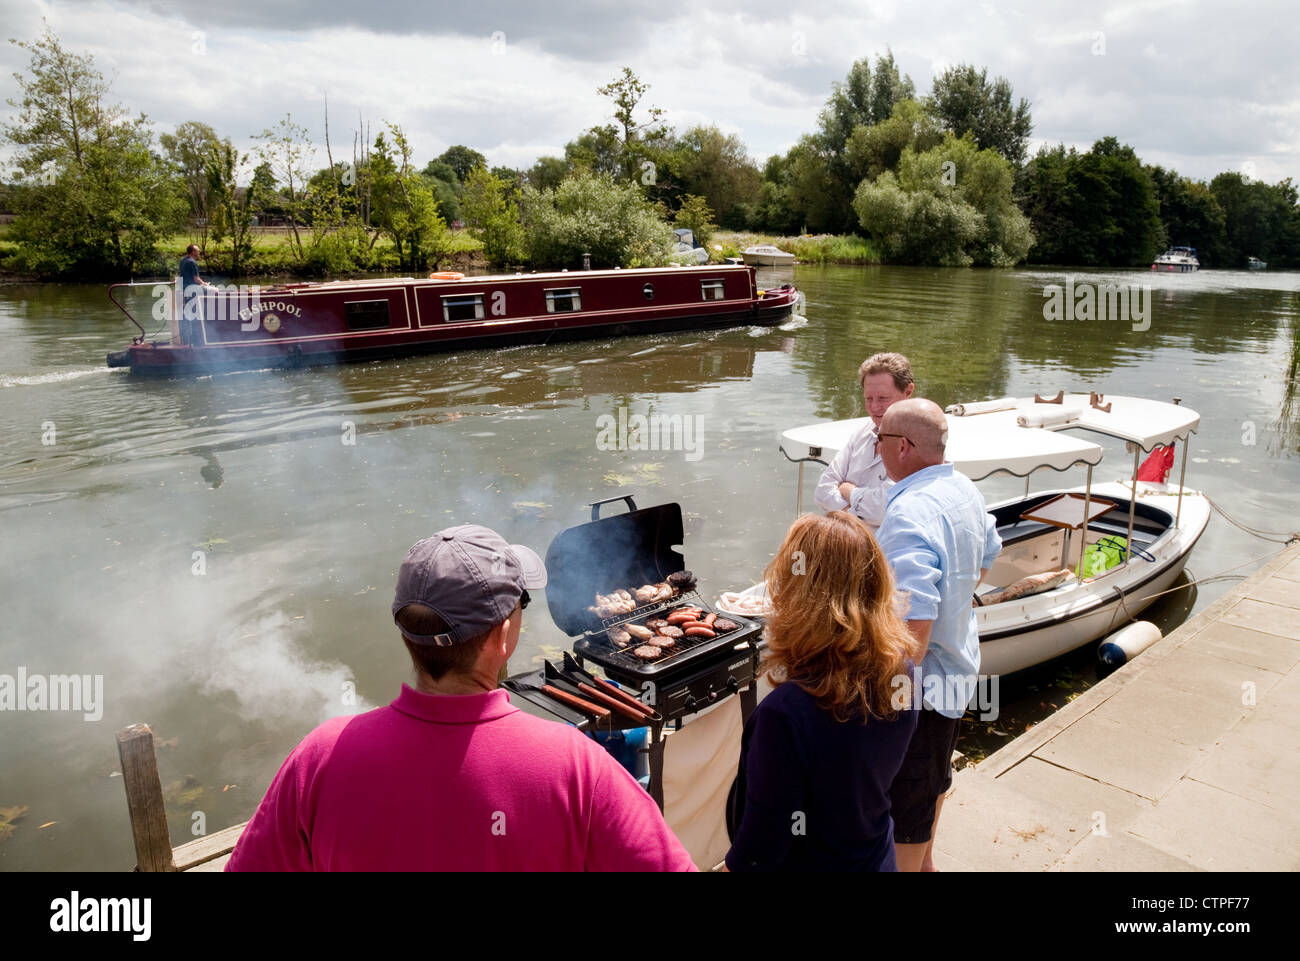 A family barbecue bbq party on the River Thames in Oxfordshire UK Stock